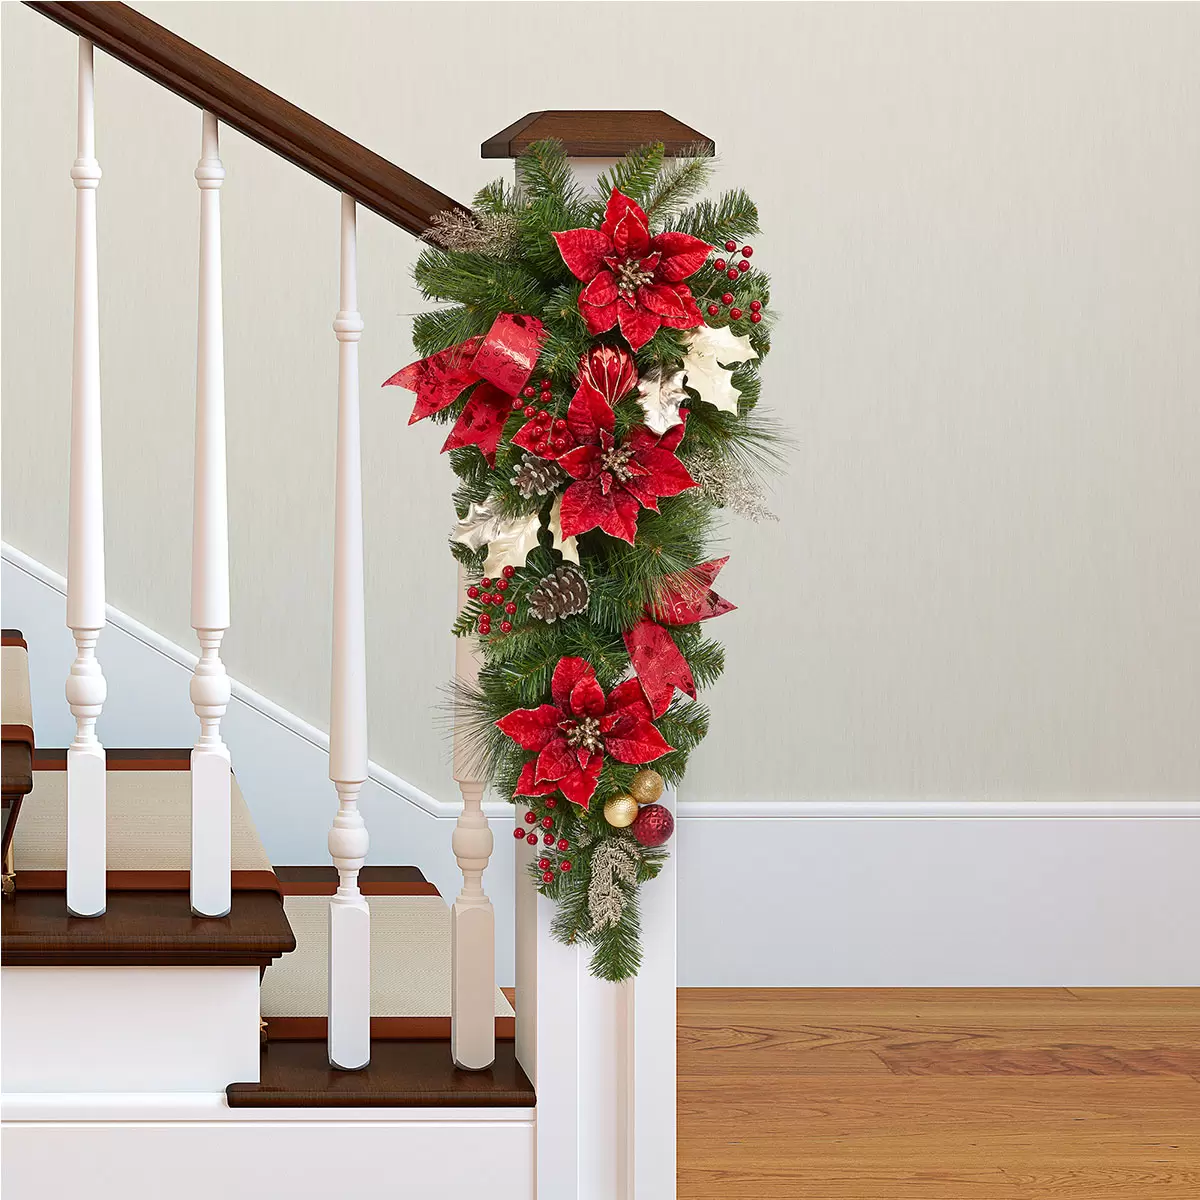 Buy 32" Decorated Swag Red Lifestyle Image at Costco.co.uk